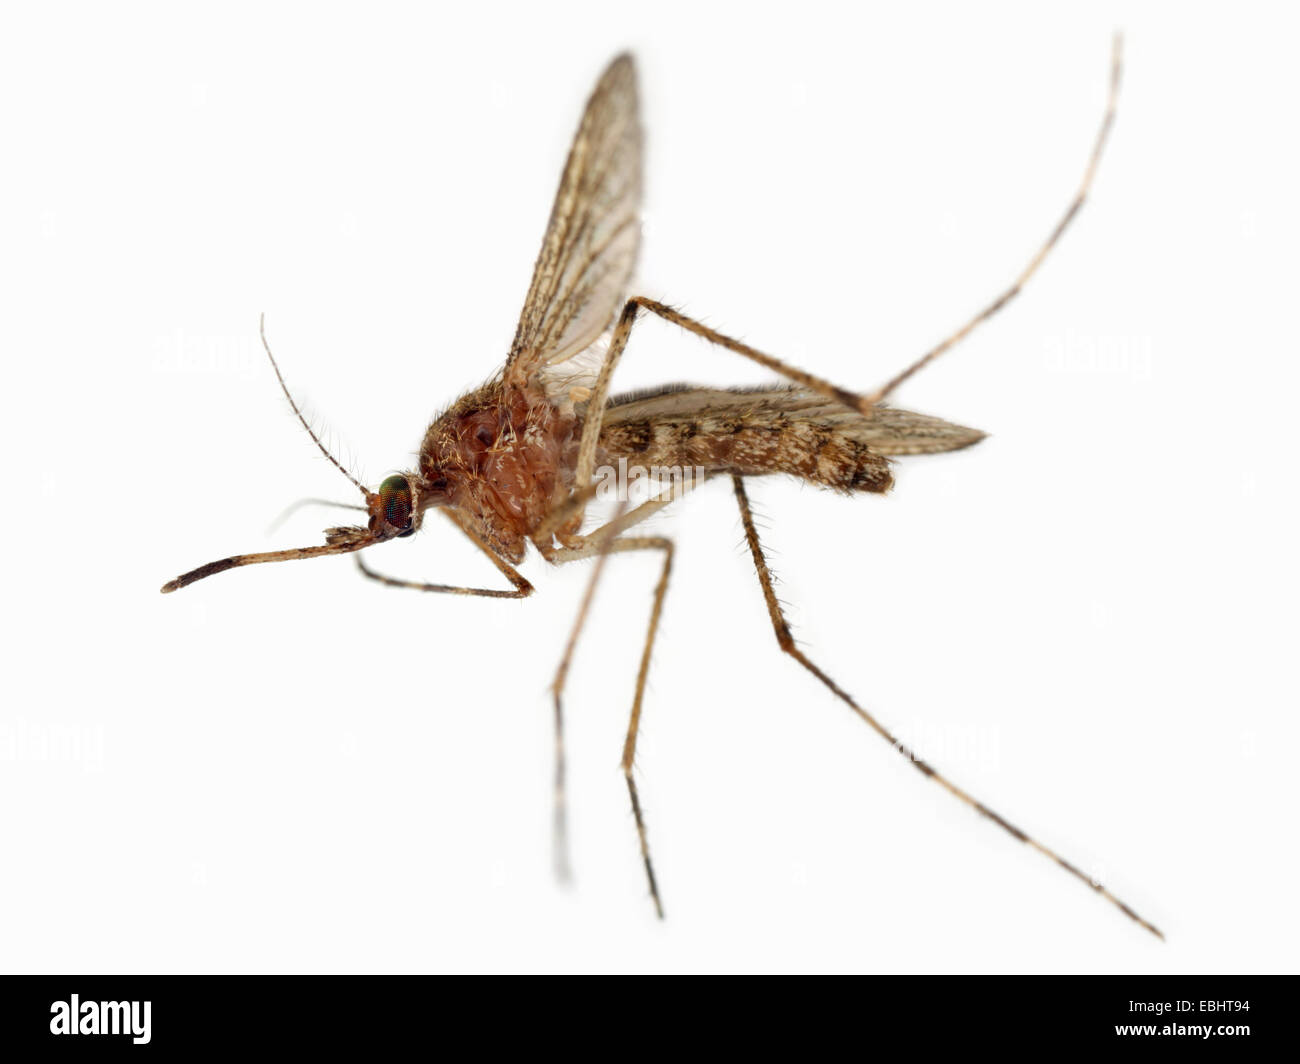 Mosquito, close-up on white background Stock Photo